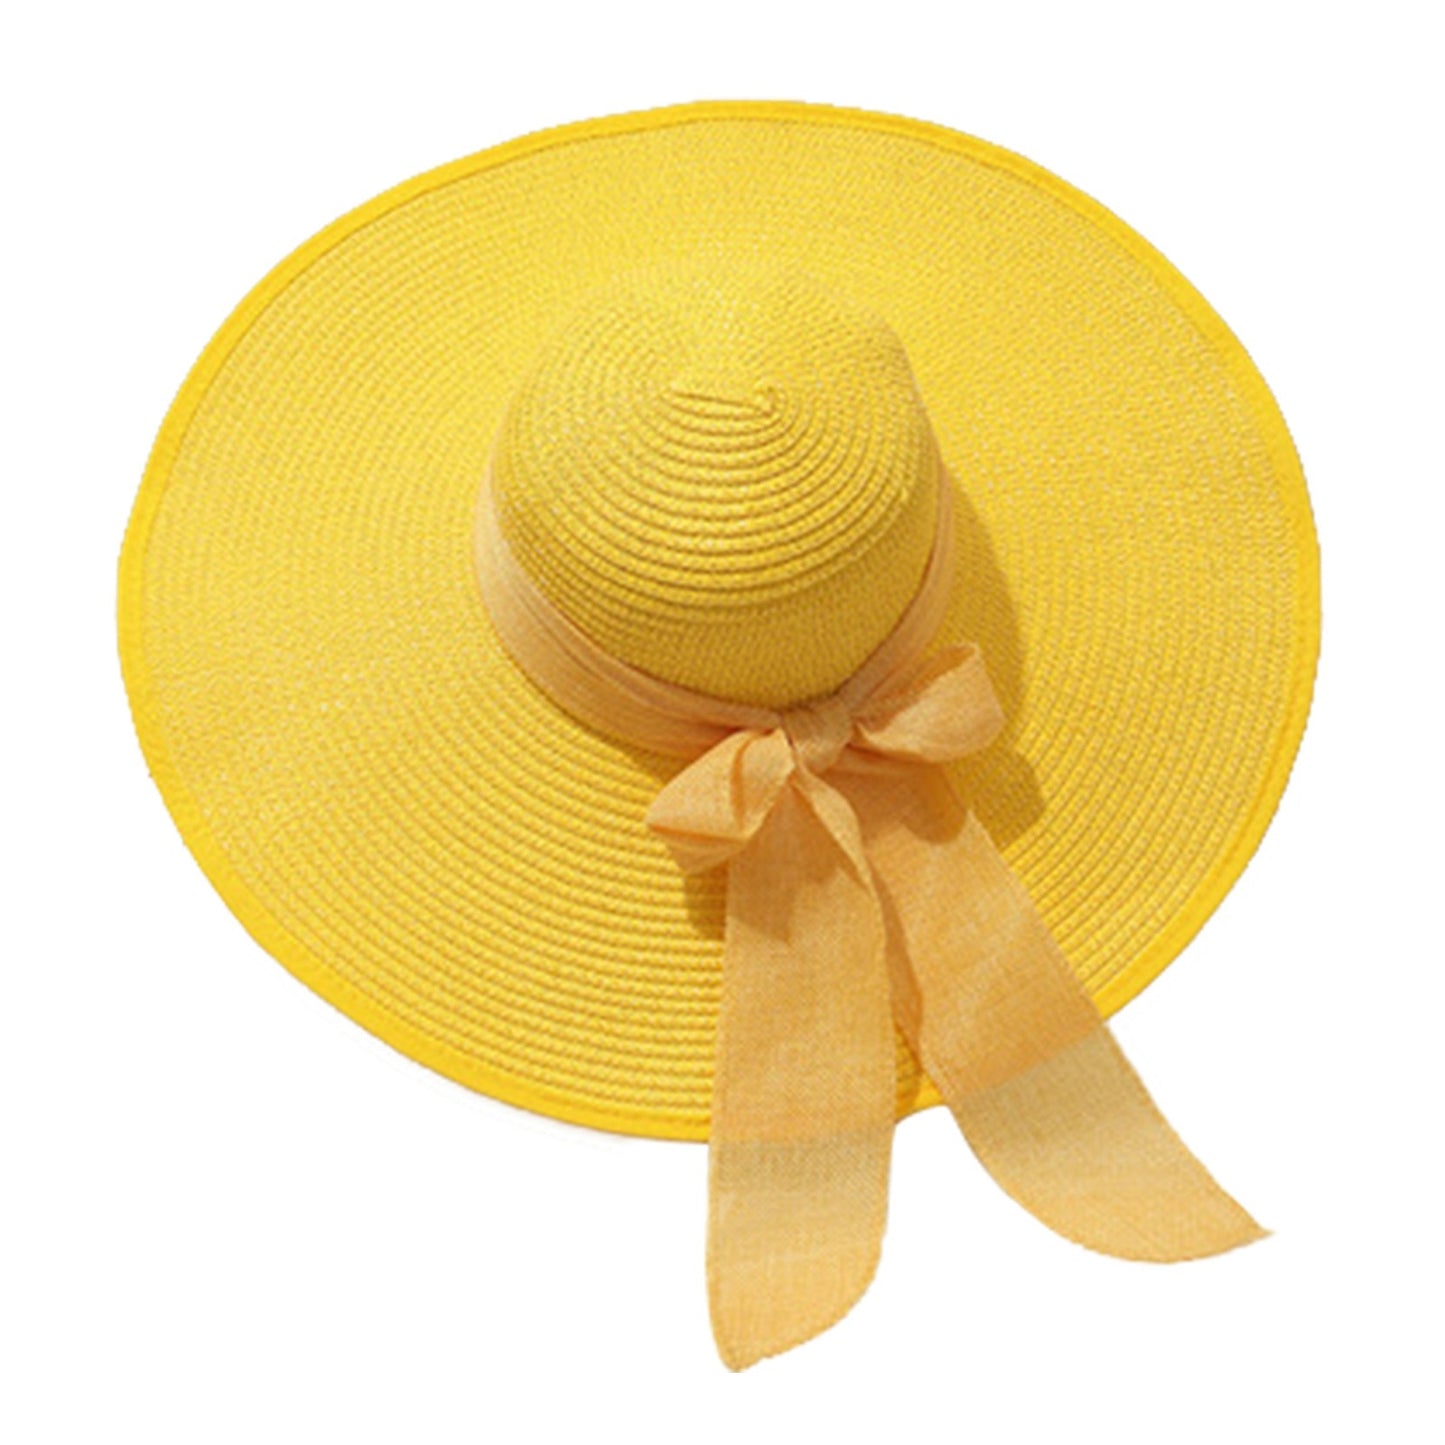 "Vacation Mood: On" Big Brim Sun Hat with Bow